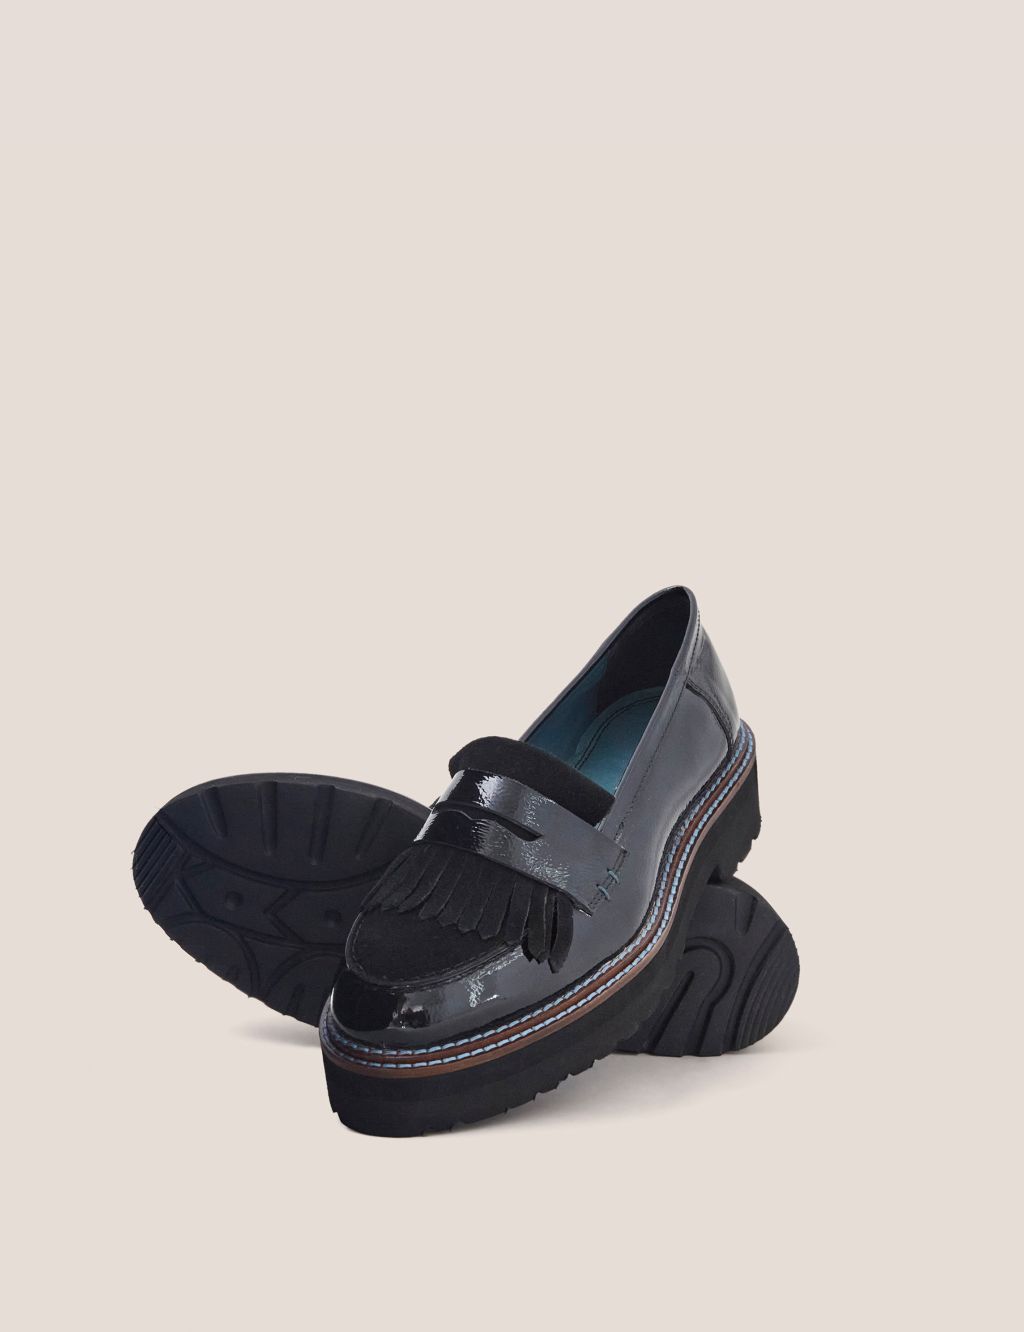 Leather Patent Slip On Block Heel Loafers image 3